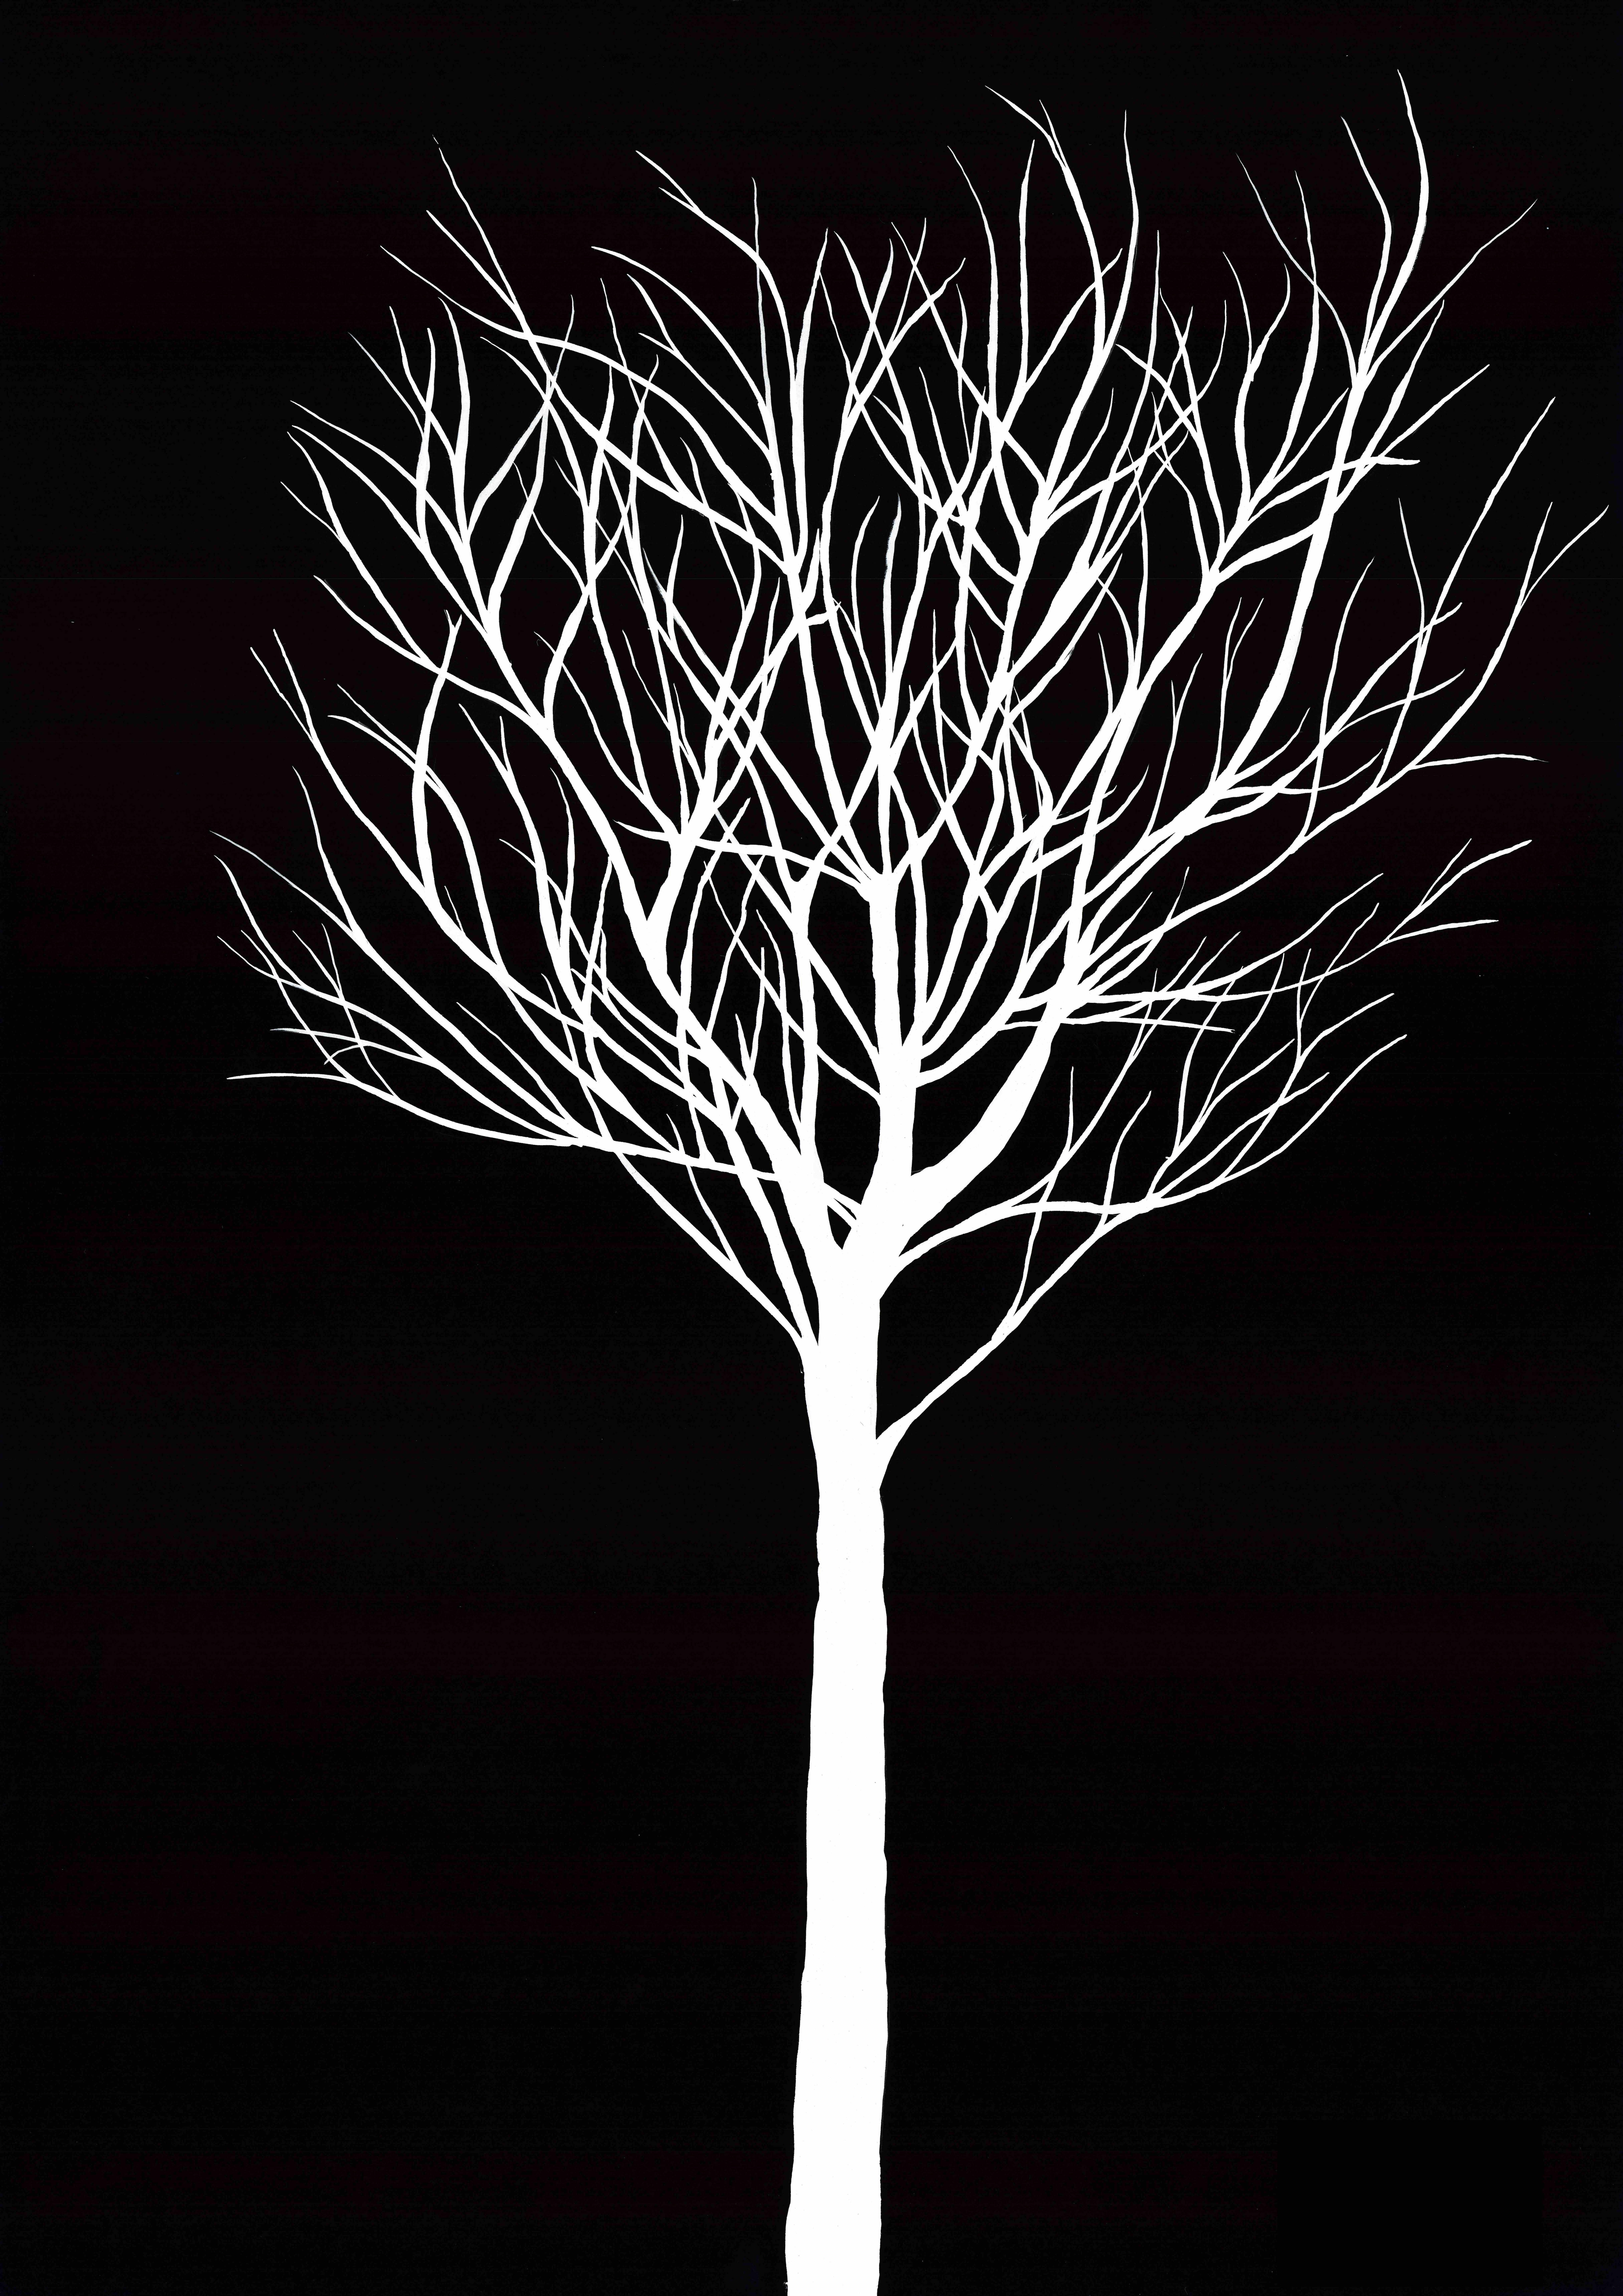 Birch Tree 2 Inverted | Ink Drawing by Debbie New